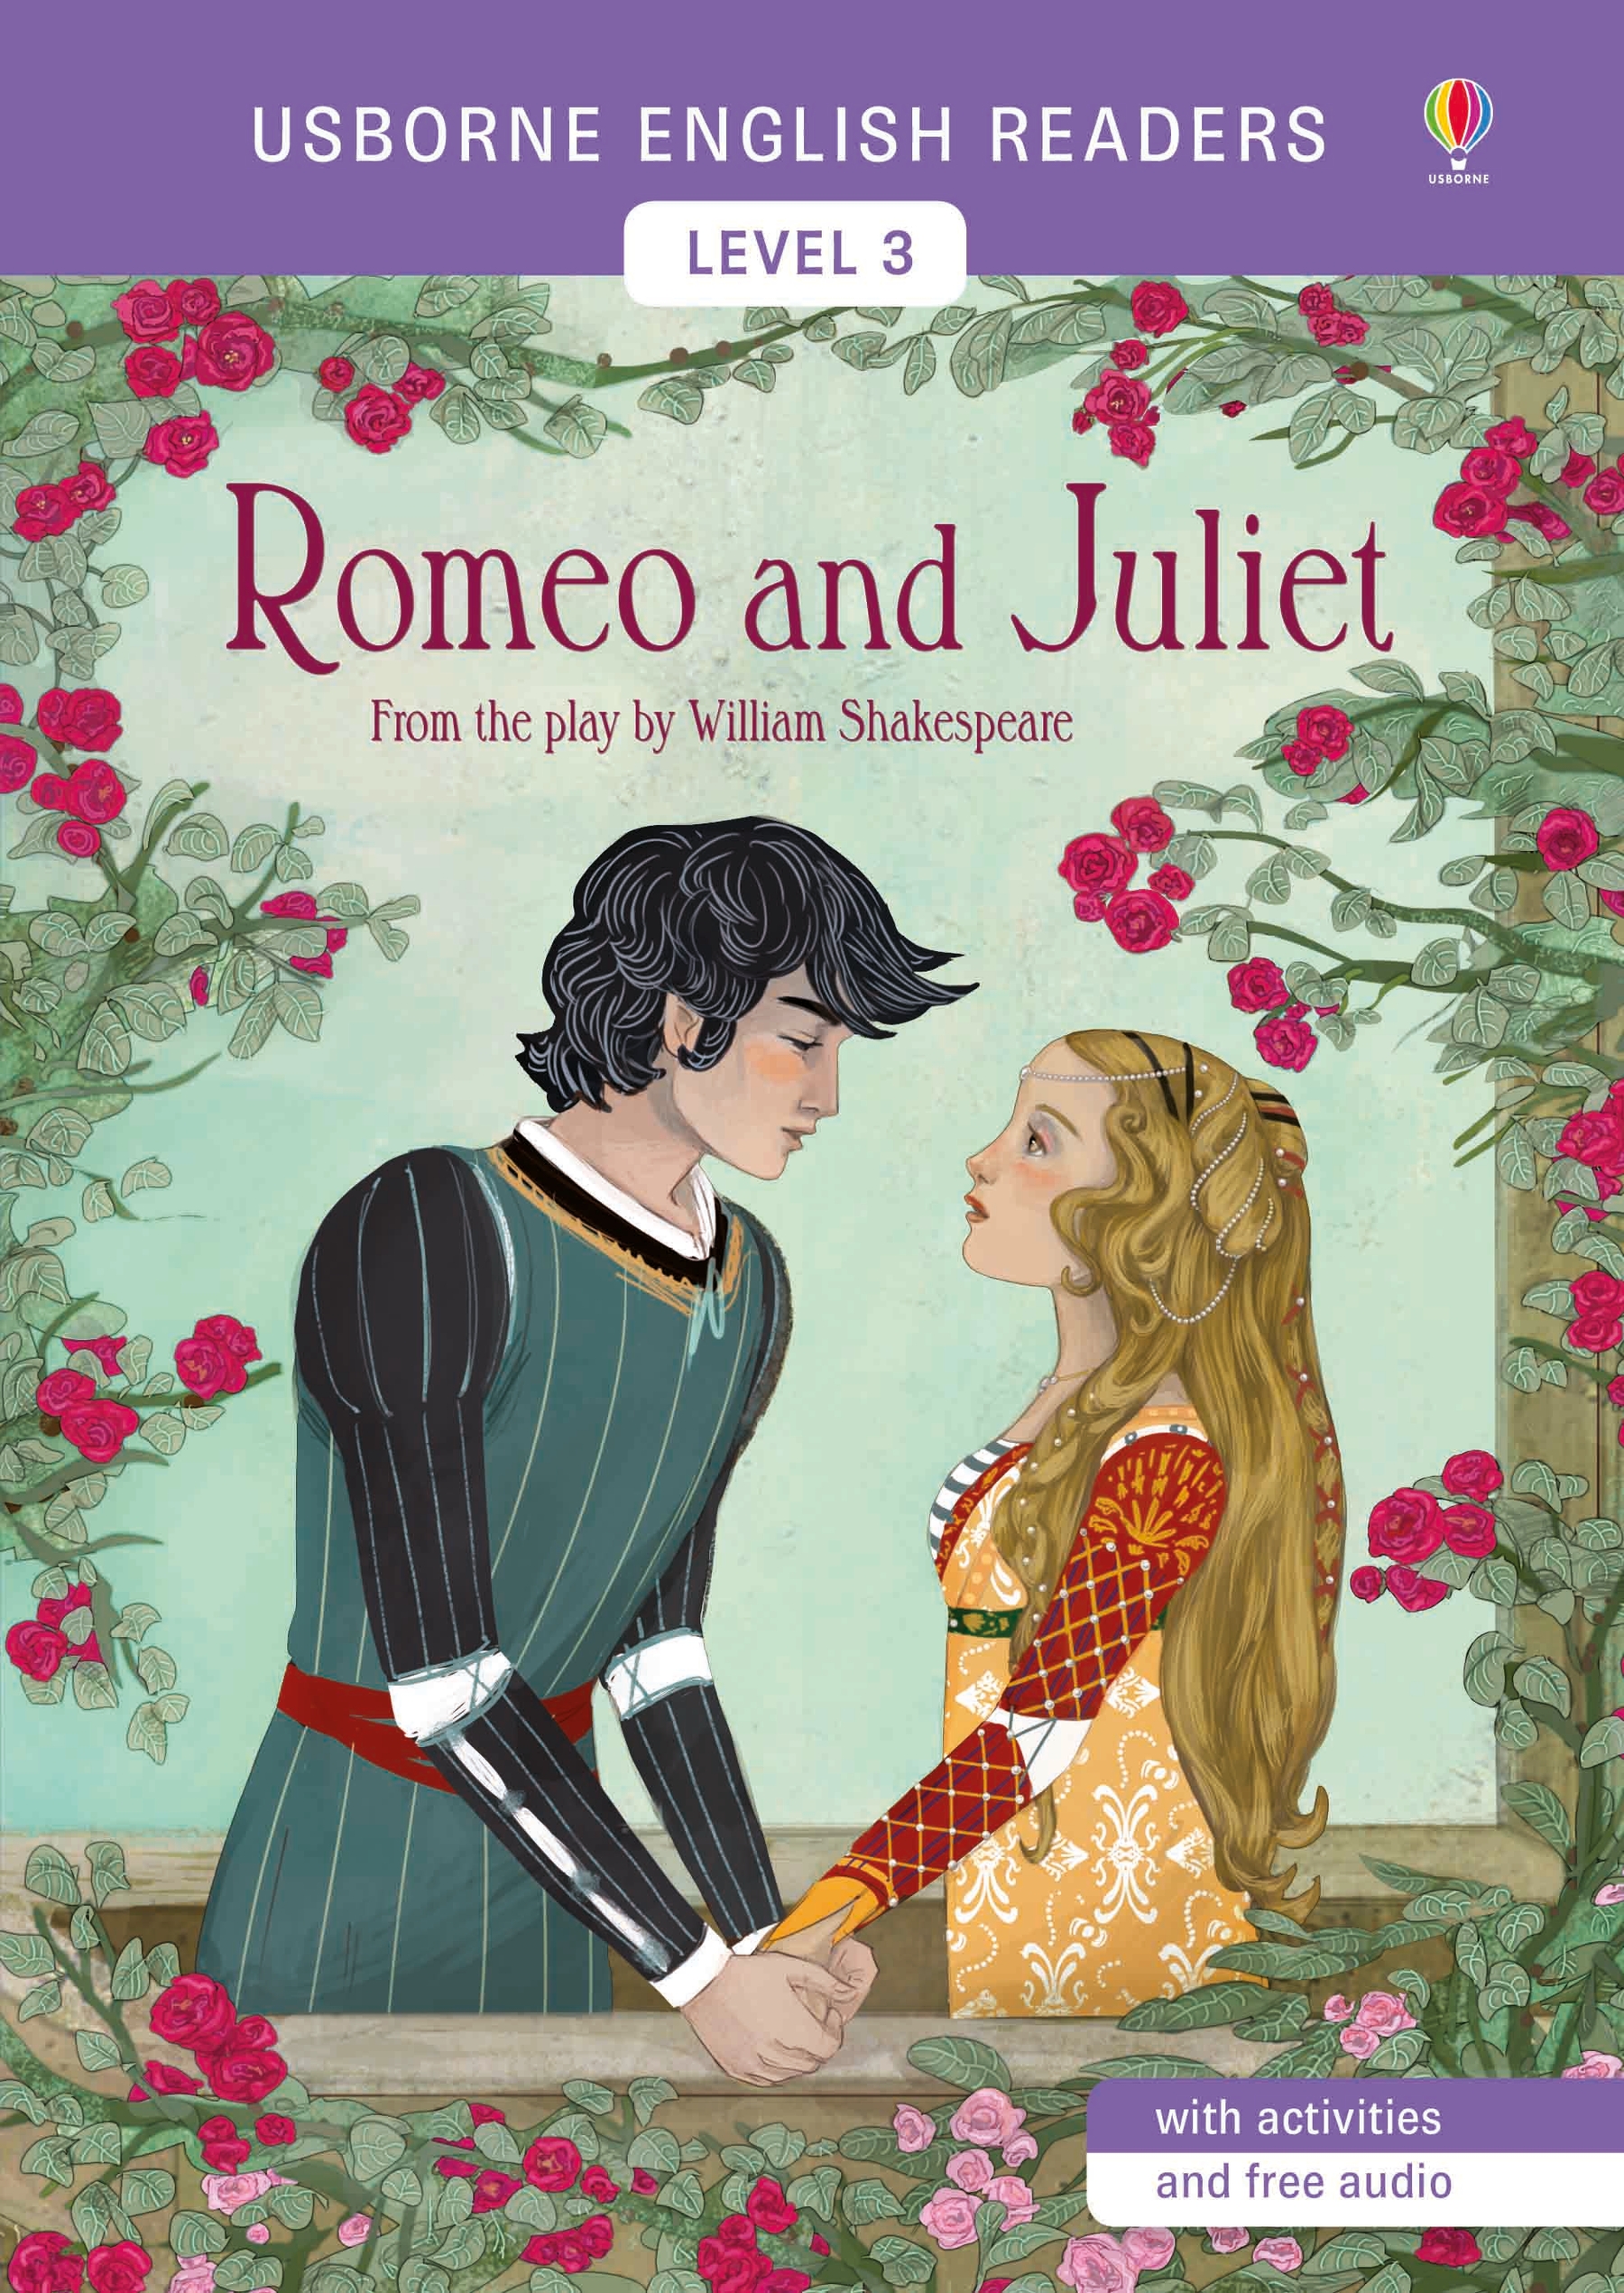 should romeo and juliet be taught in schools